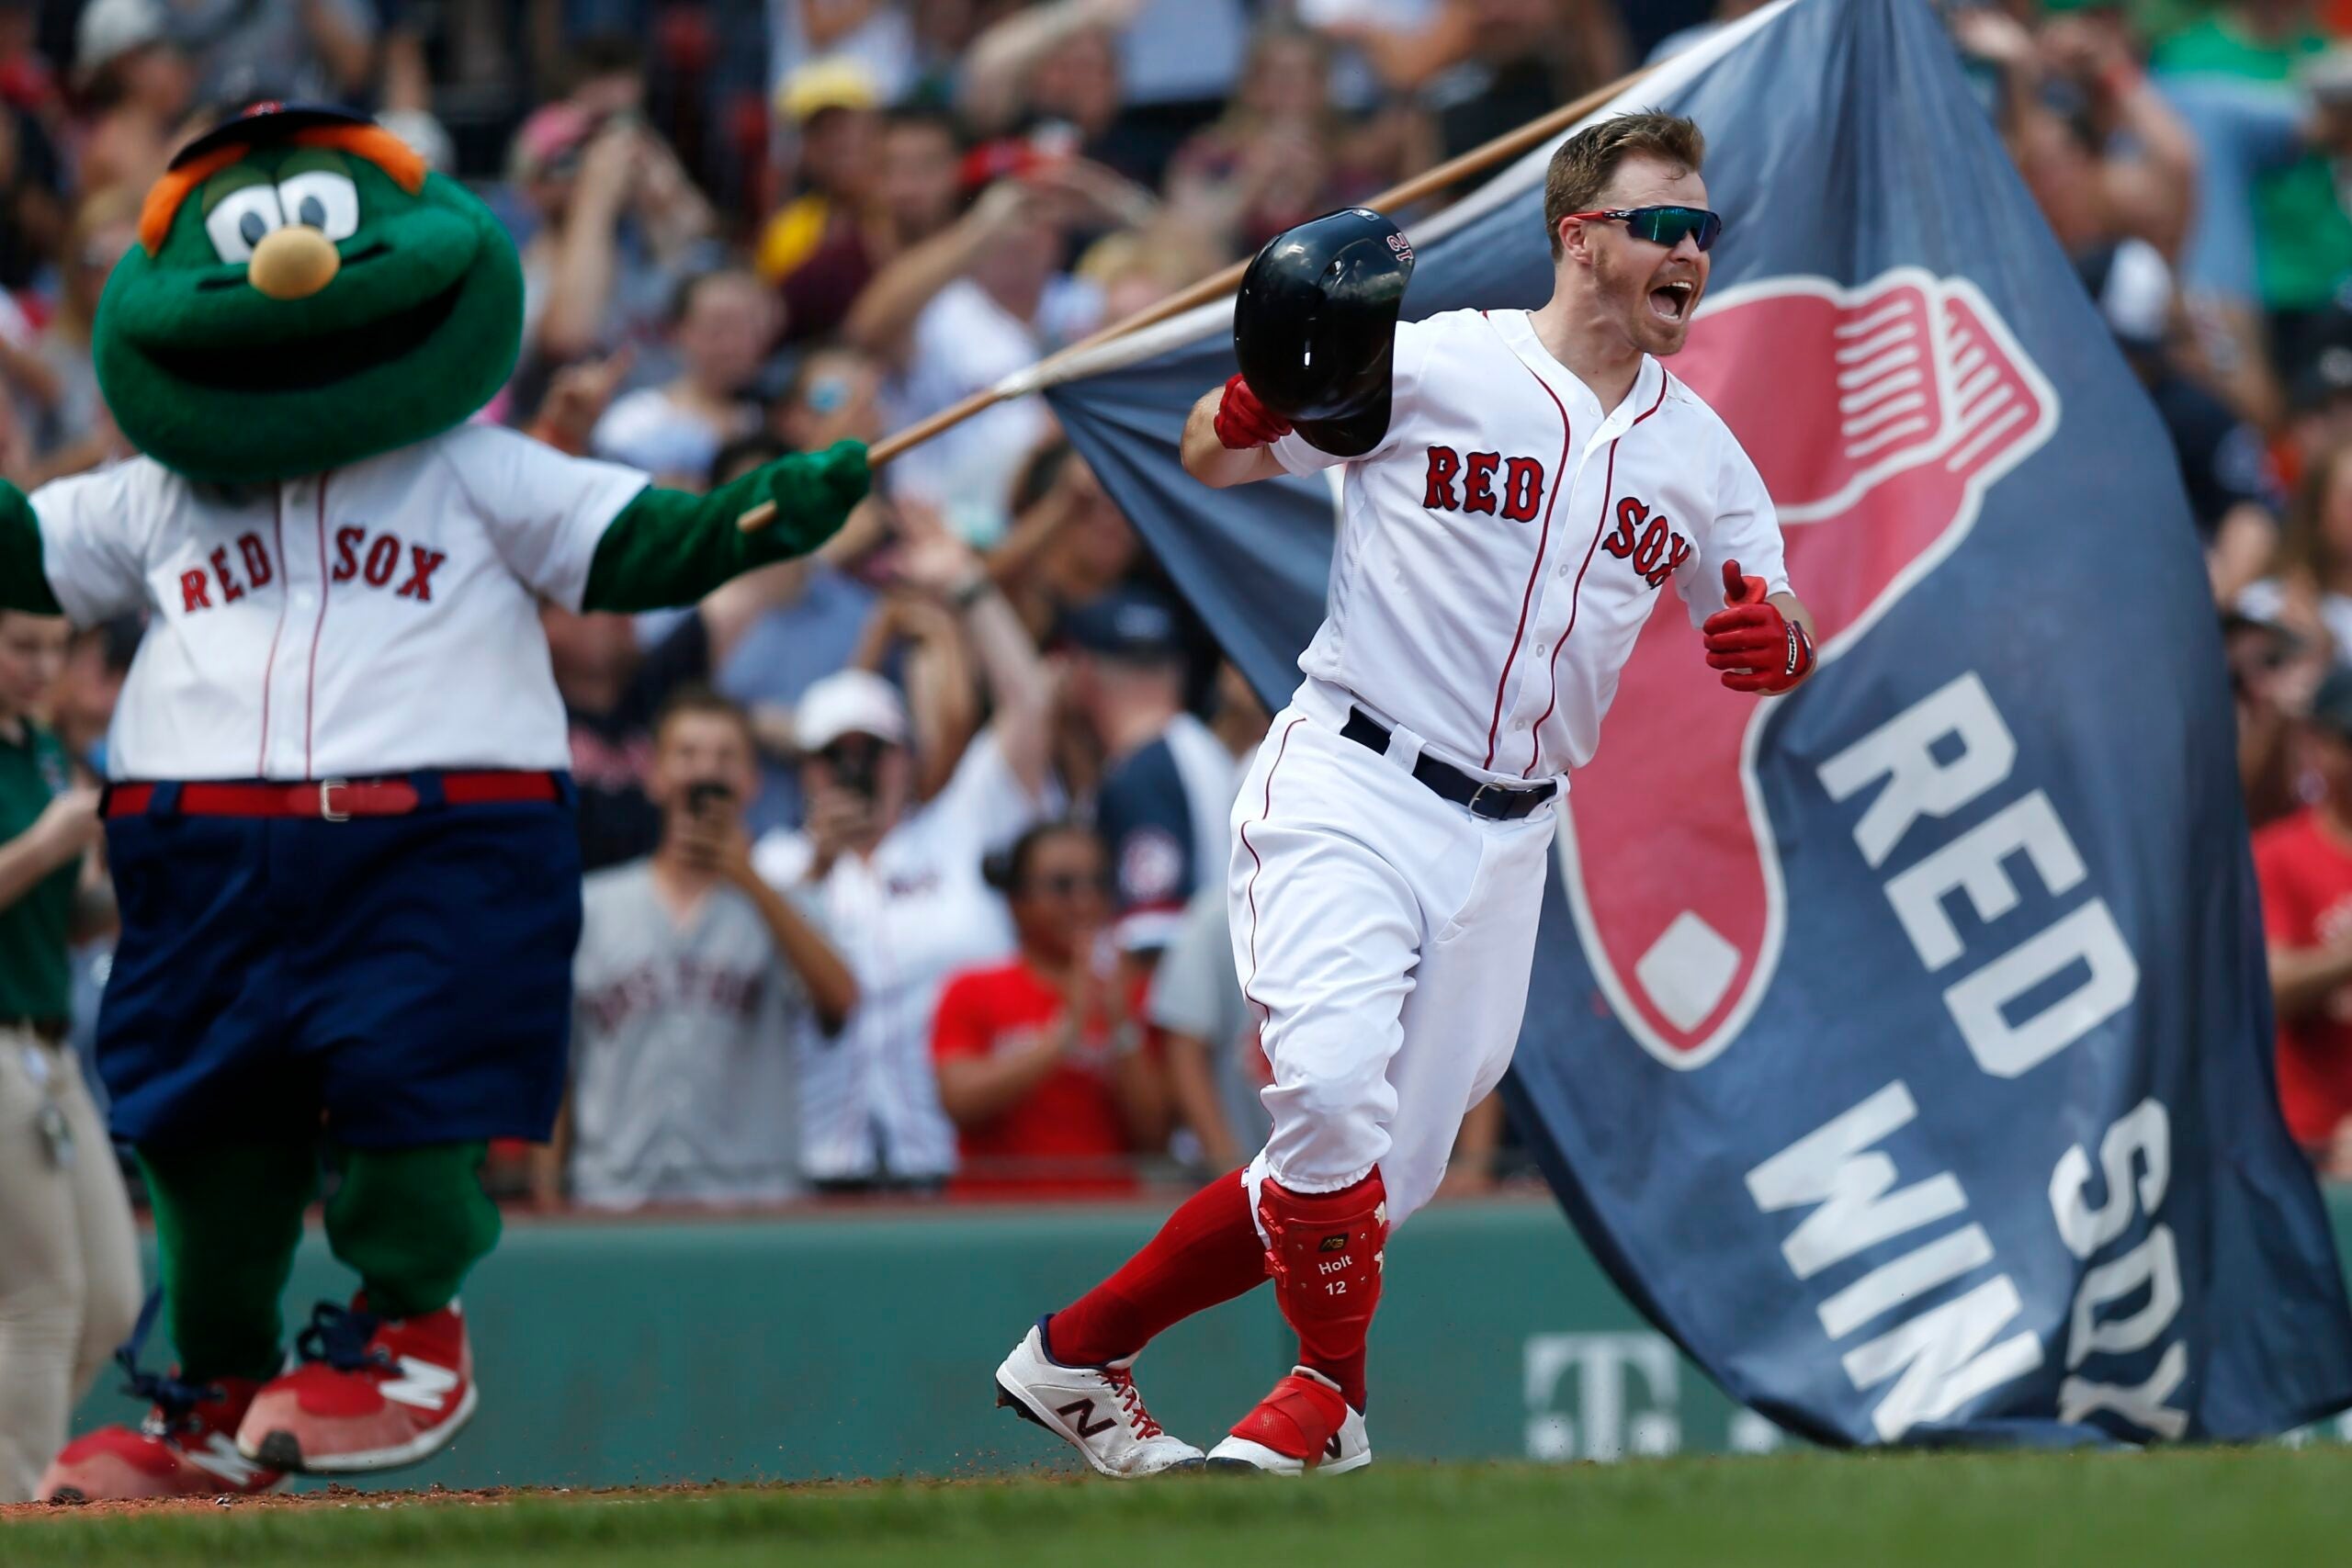 Homer raises the bar for Bay, Red Sox